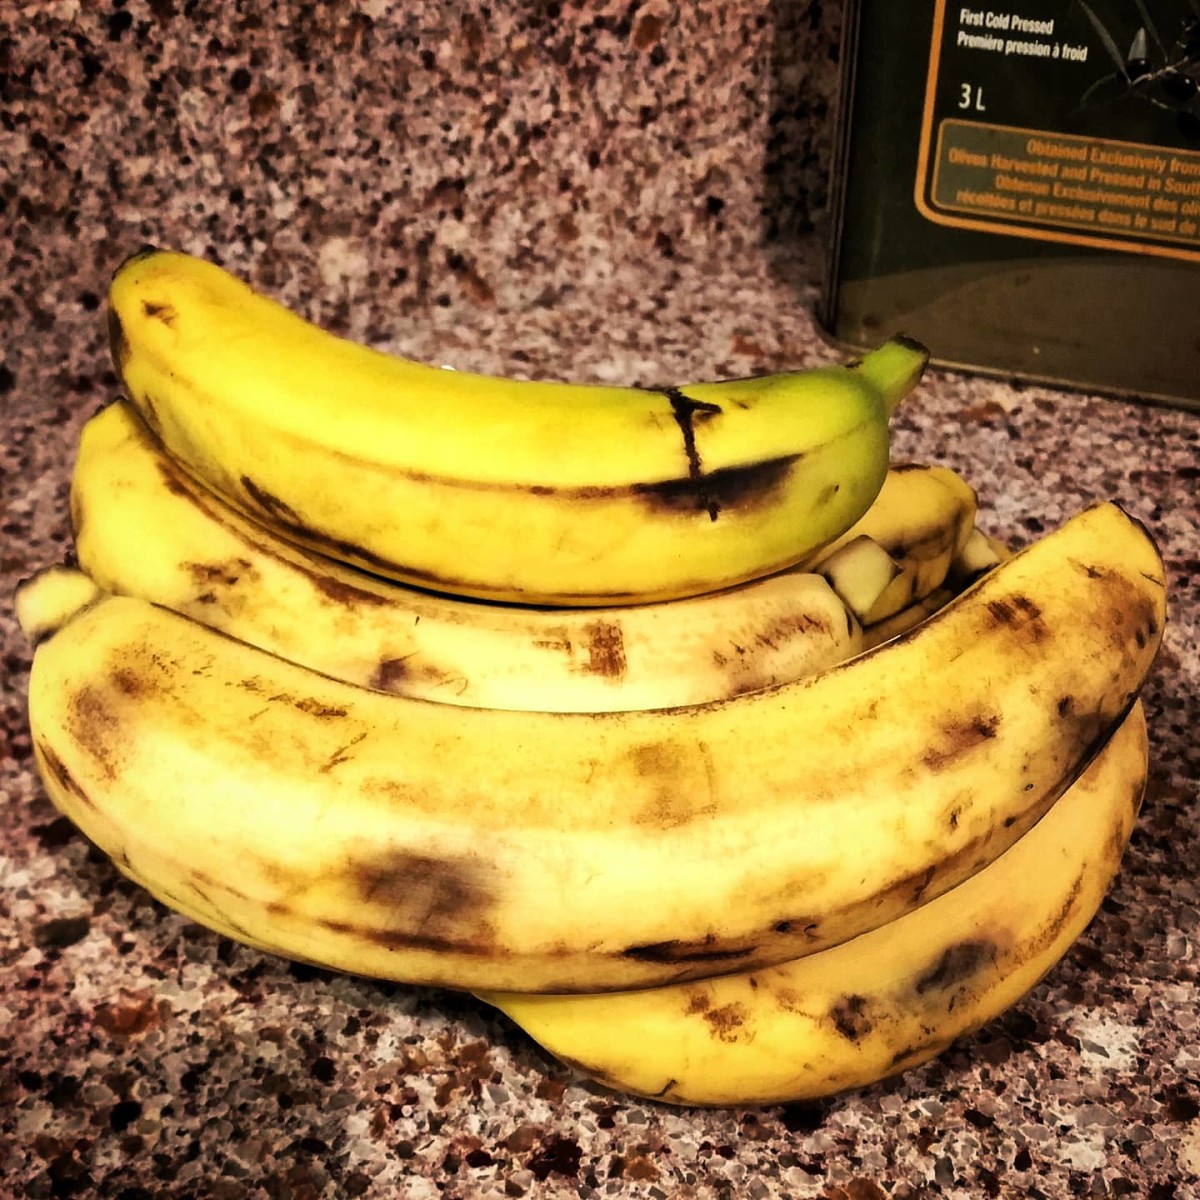 You can't go wrong having extra bananas on hand. Store them in the freezer until you need bananas for a recipe. Sometimes you can even by a bunch of bruised bananas at a discount.